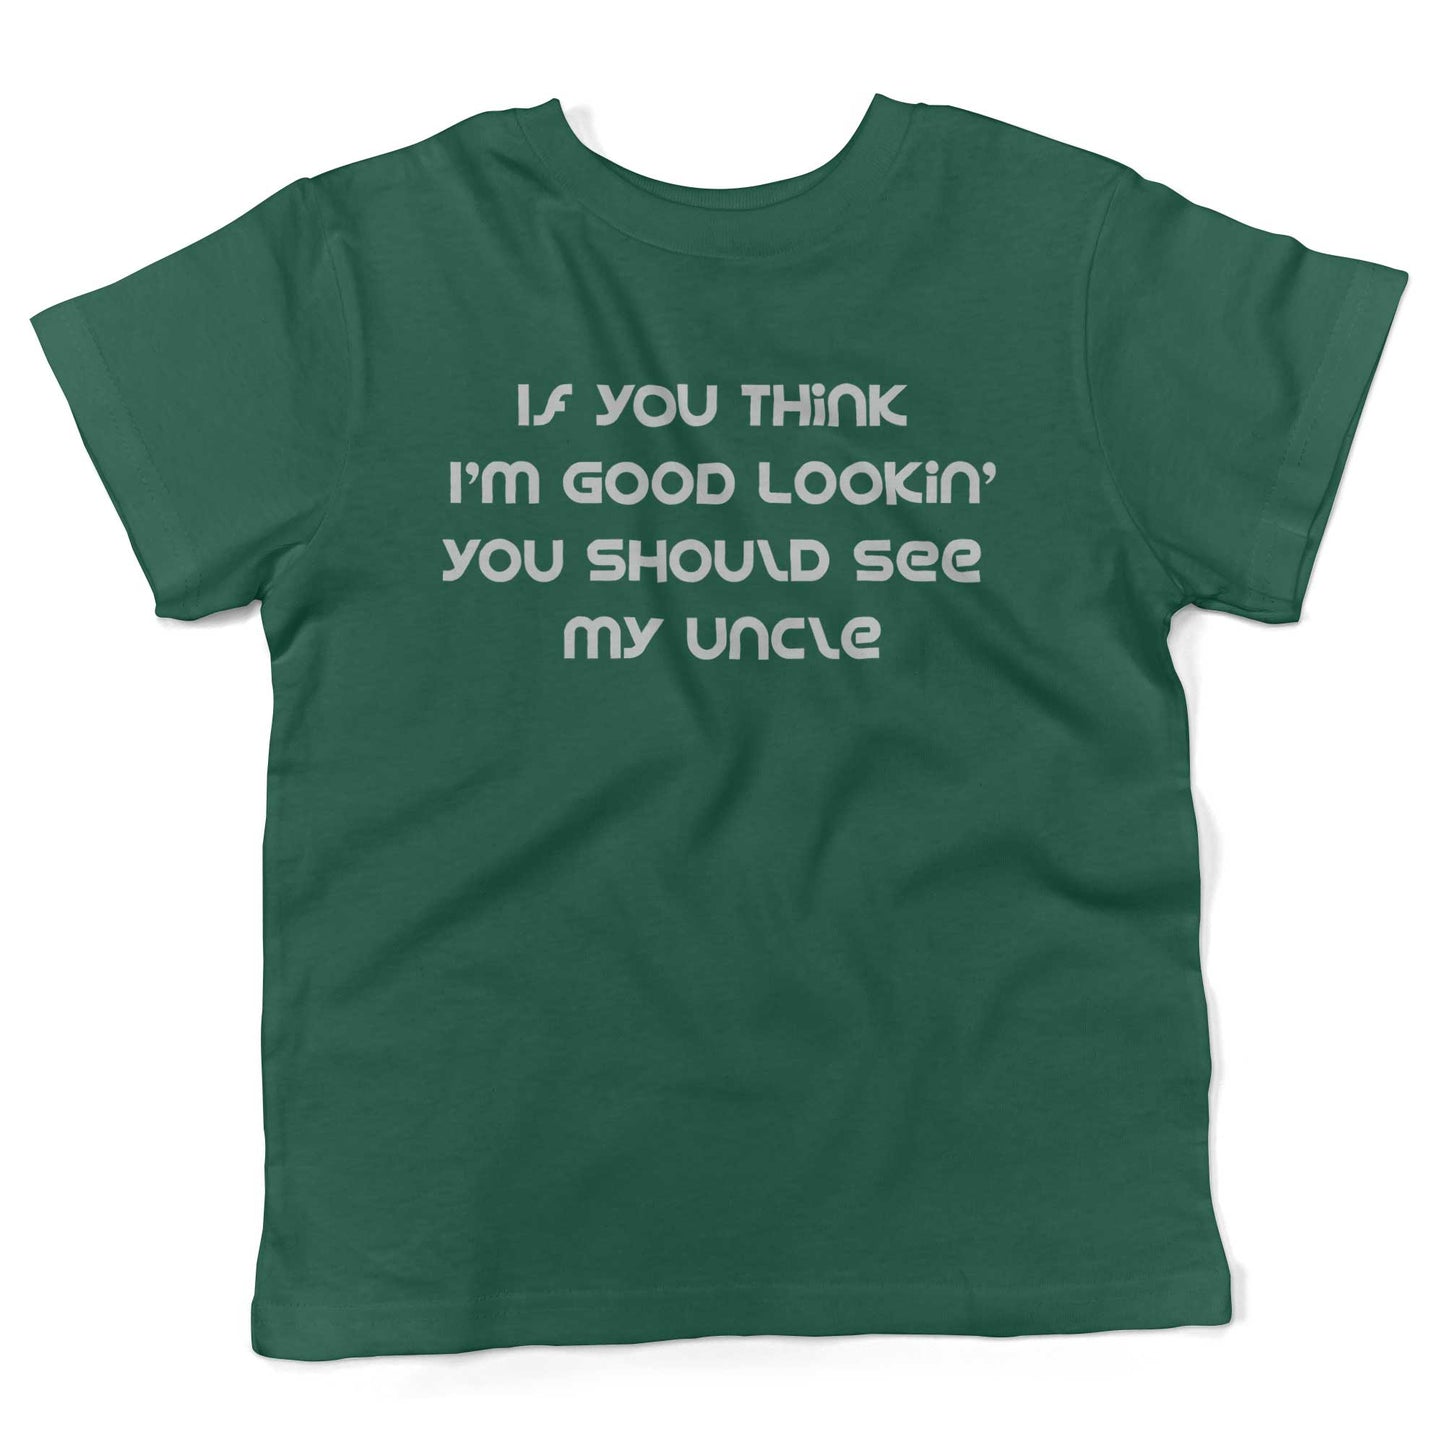 If You Think I'm Good Lookin' You Should See My Uncle Toddler Shirt-Kelly Green-2T